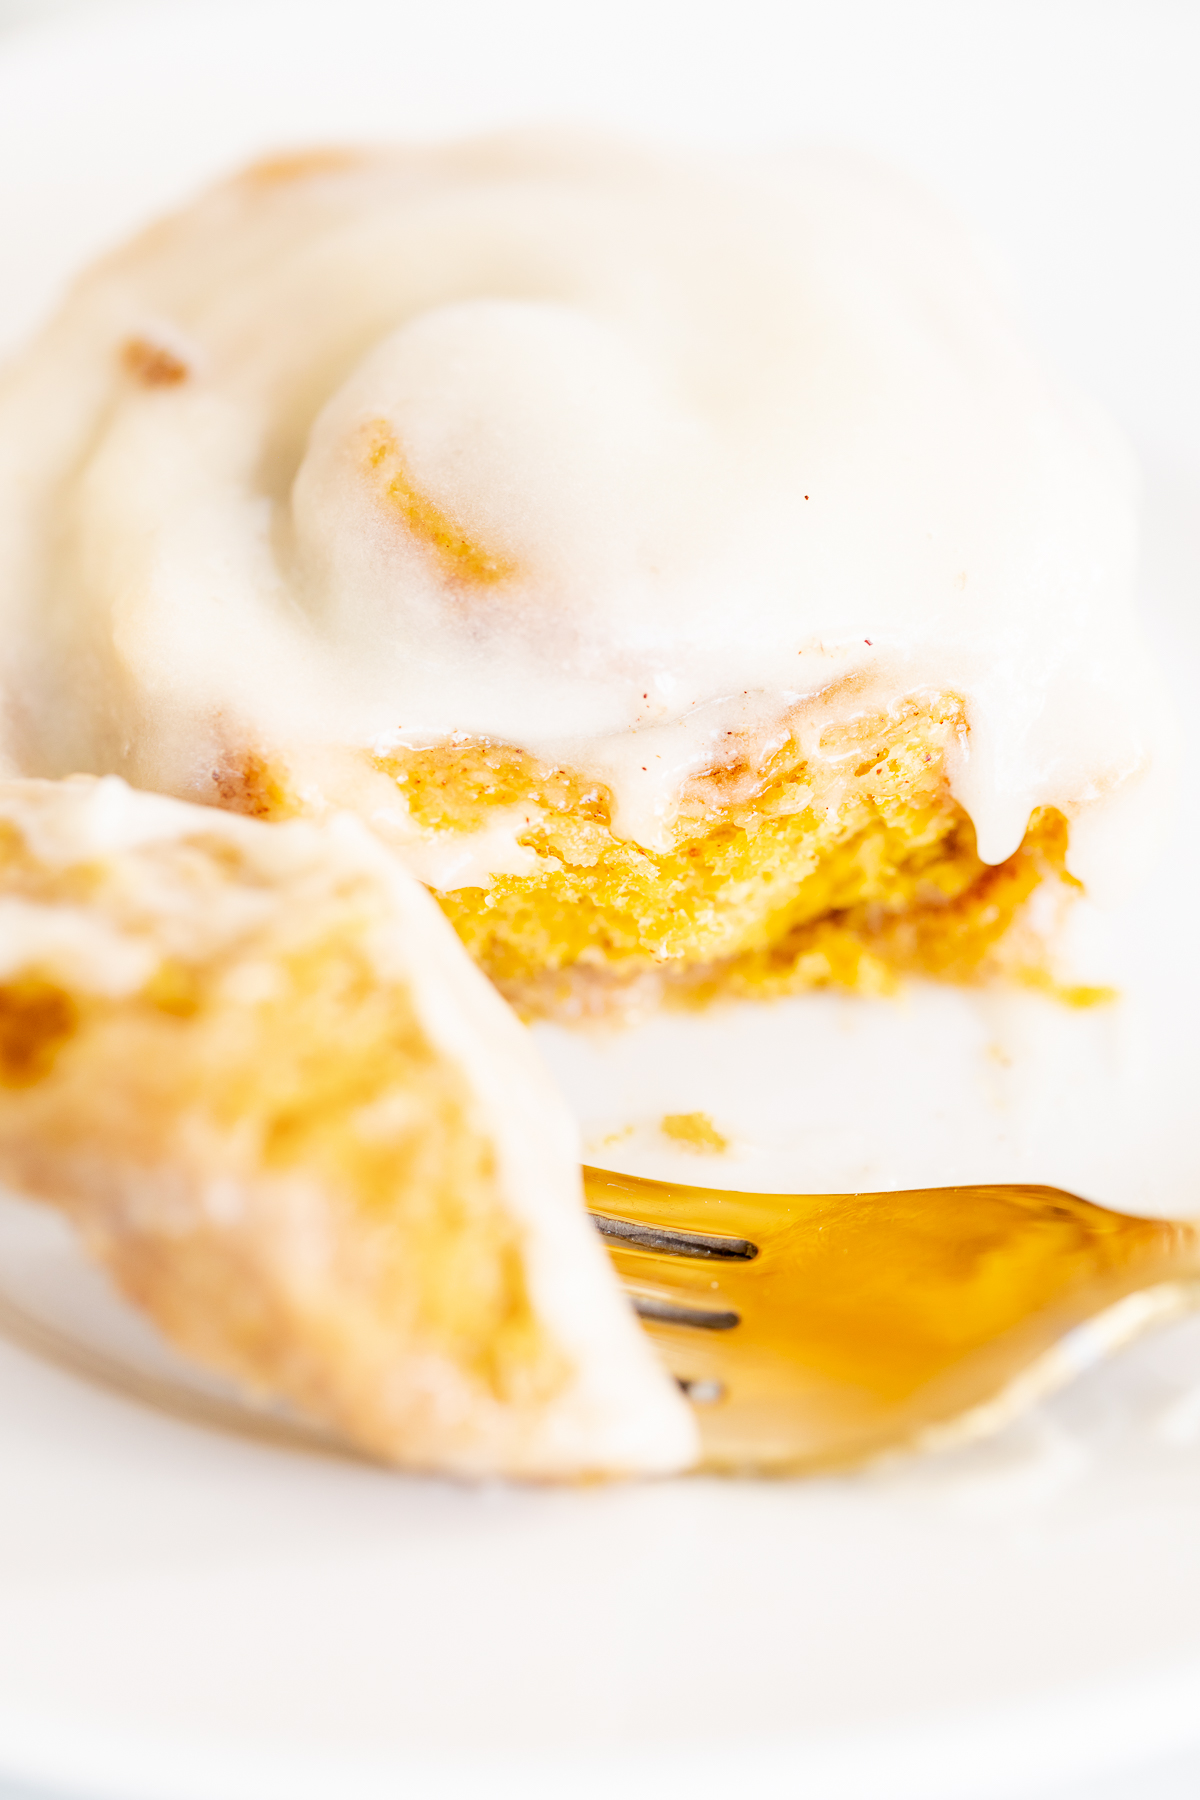 A pumpkin cinnamon roll on a plate with a fork.